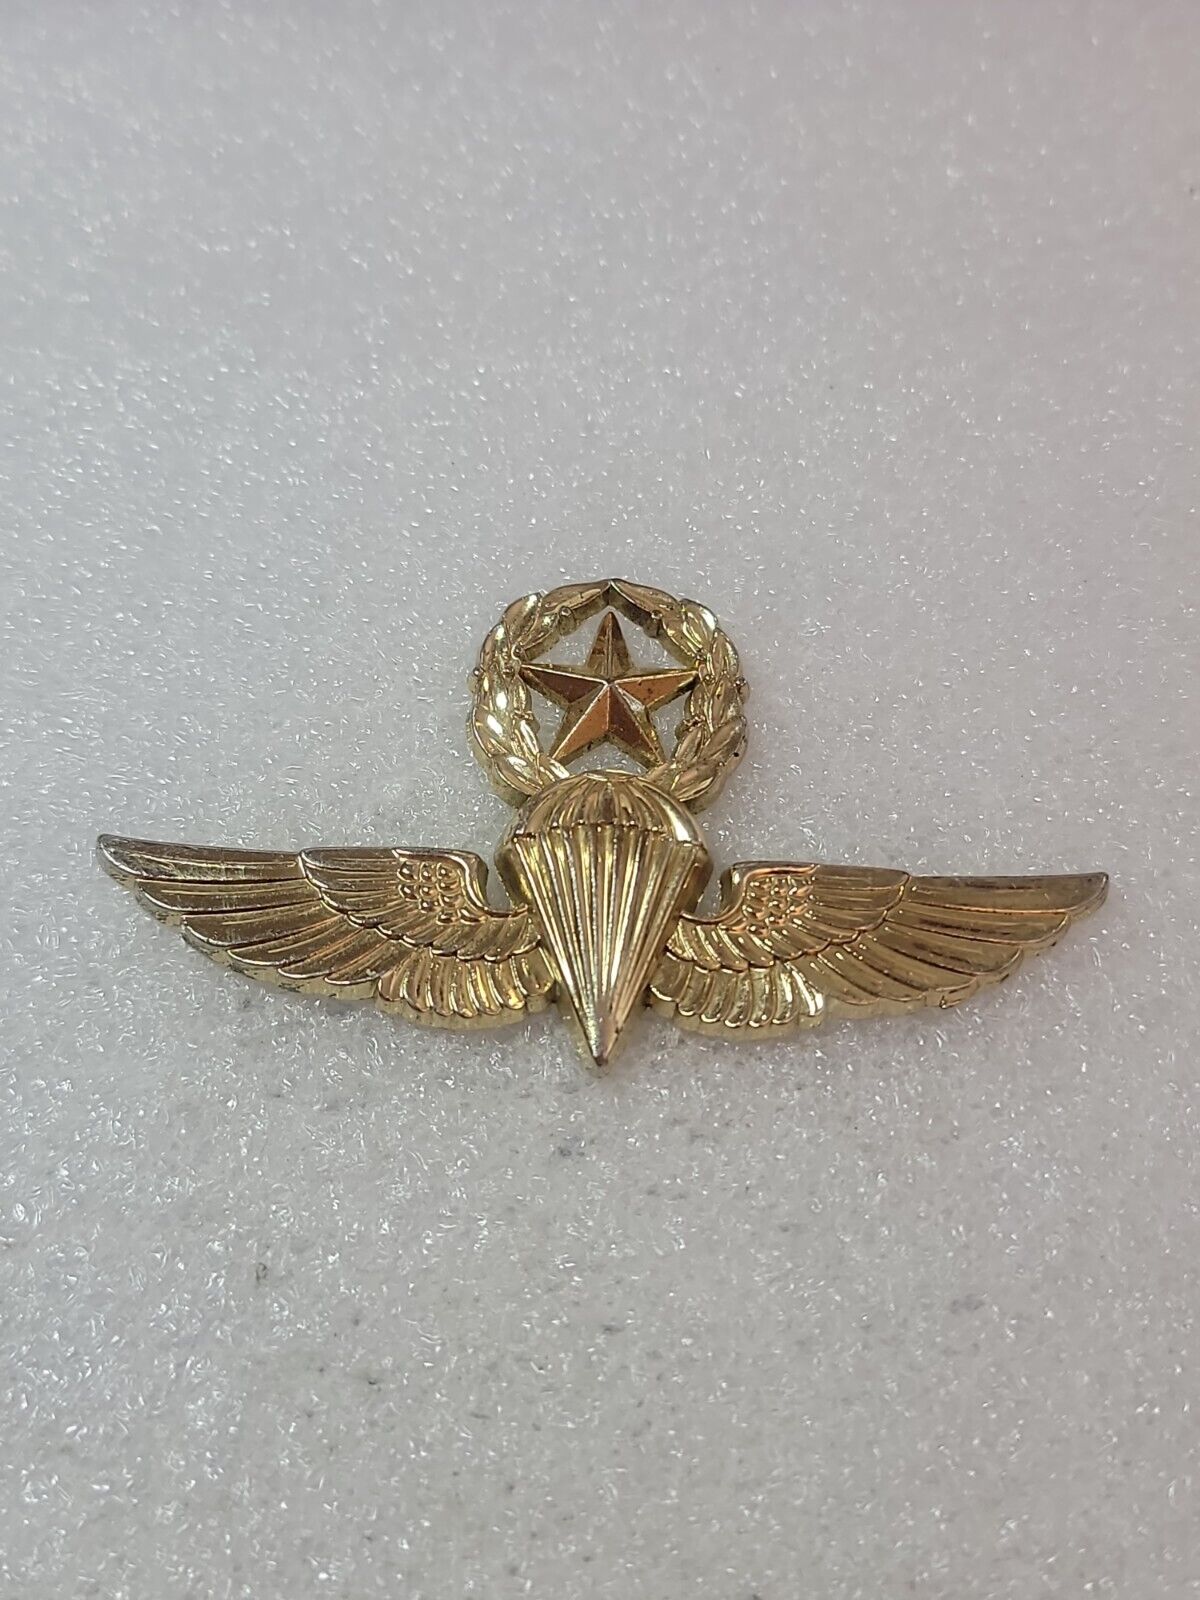 Dominican Republic Master Jump Wings Dual Post Pin Clutch Back Large Gold Tone